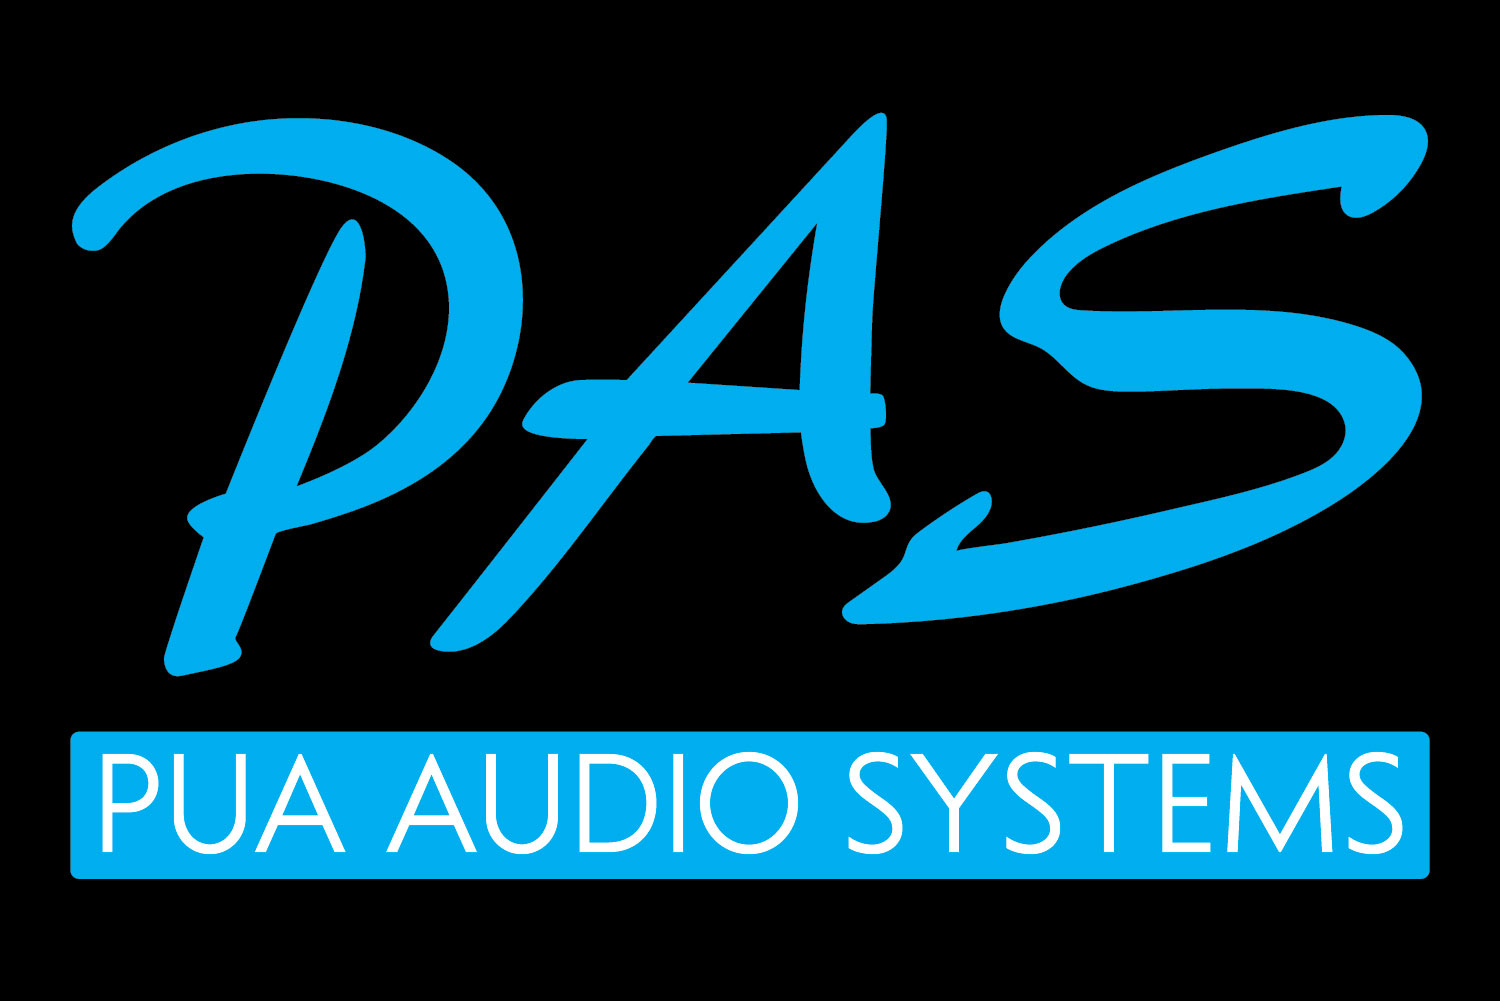 PUA-Audio-Systems-Logo-LadyLexProductions.jpg